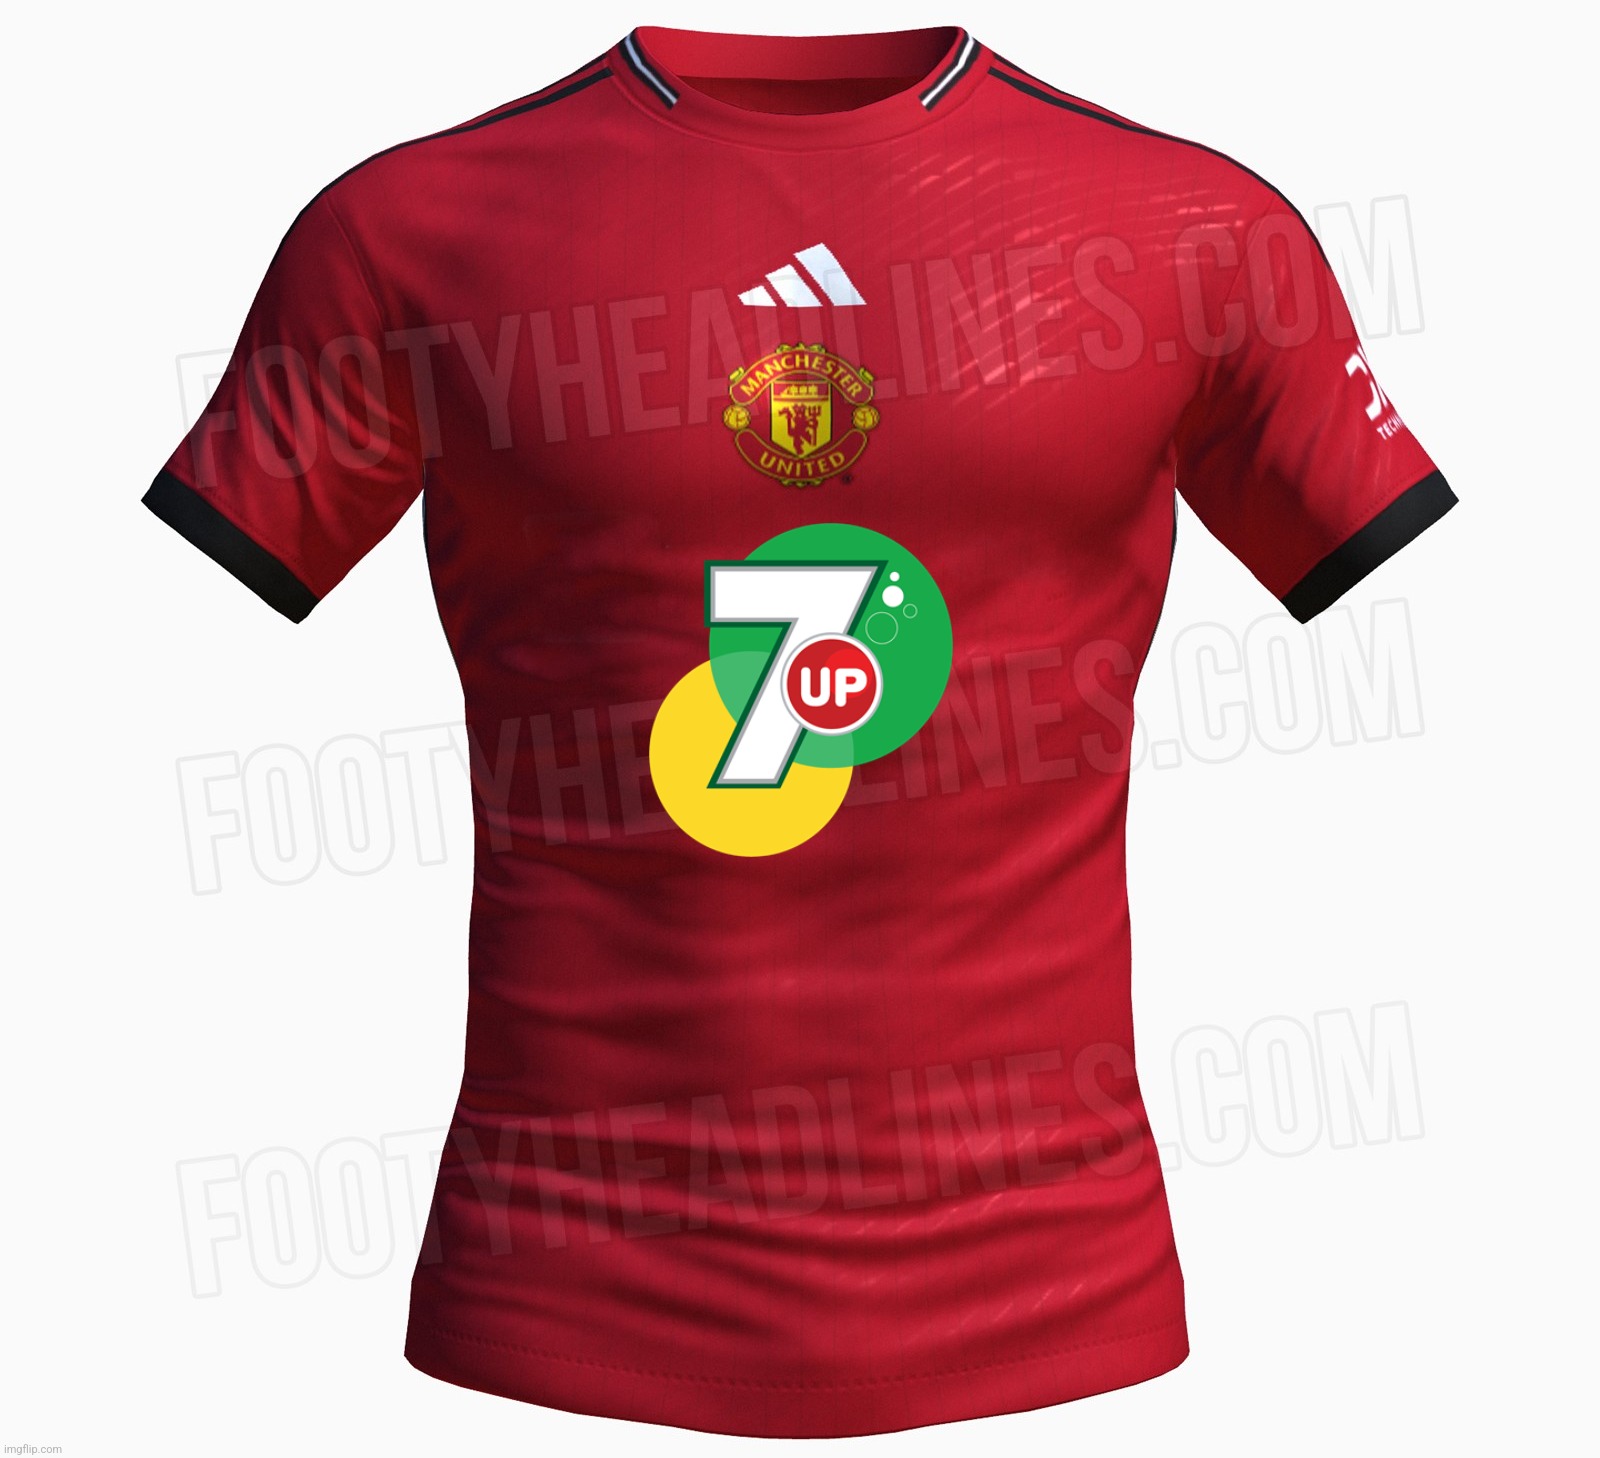 New Manchester United Jersey after 7-0 down vs Liverpool (JOKE) | image tagged in manchester united,liverpool,7up,premier league,football,soccer | made w/ Imgflip meme maker